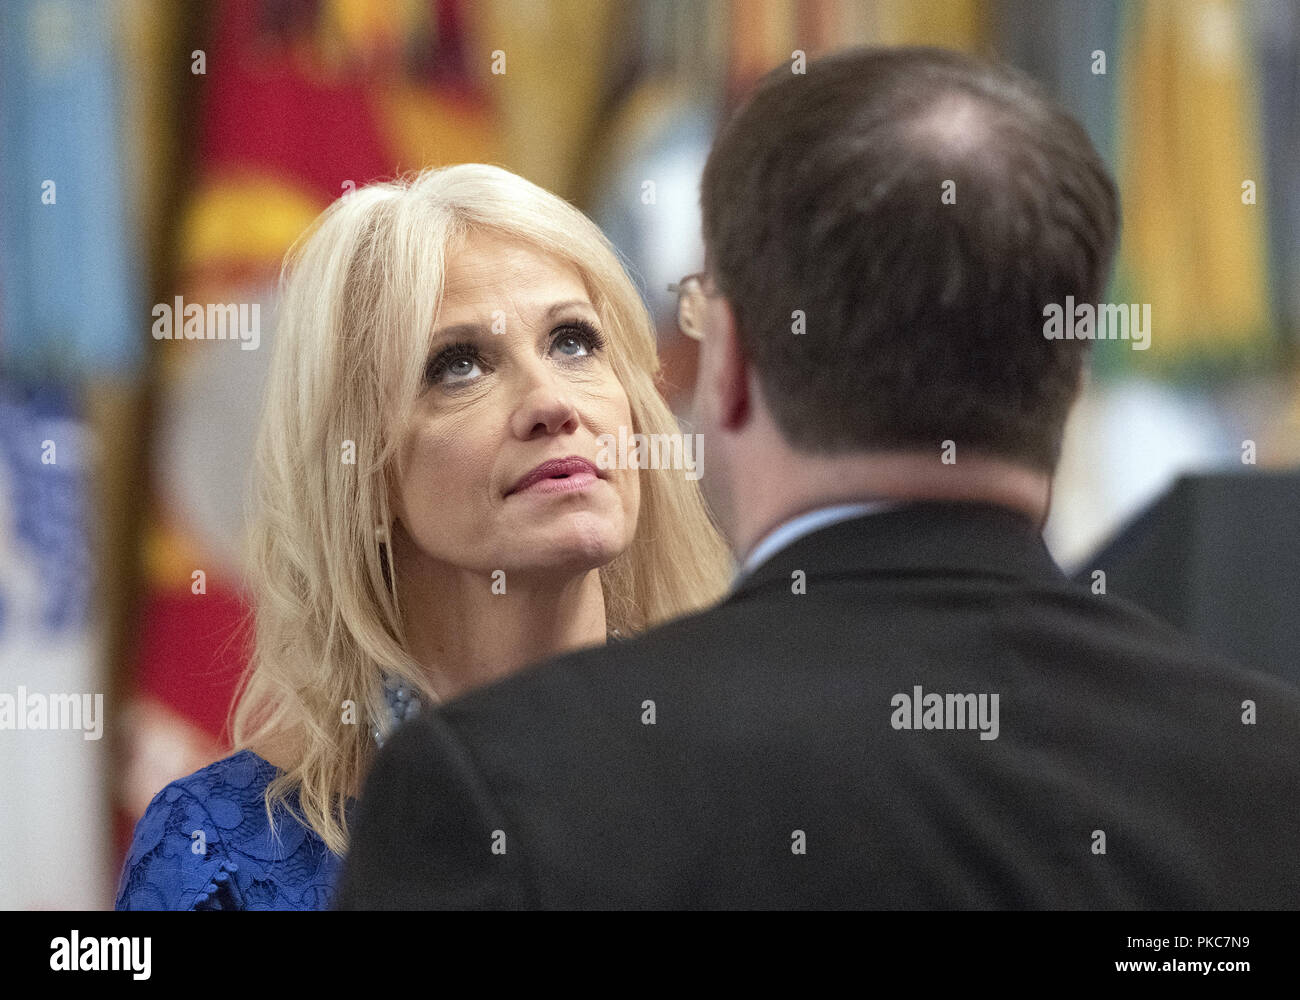 Washington, District of Columbia, USA. 12th Sep, 2018. Counselor to the President Kellyanne Conway, left, in conversation with United States Secretary of Veterans Affairs Robert Wilkie prior to the arrival of US President Donald J. Trump who will make remarks at the Congressional Medal of Honor Society Reception in the East Room of the White House in Washington, DC on Wednesday, September 12, 2018 Credit: Ron Sachs/CNP/ZUMA Wire/Alamy Live News Stock Photo